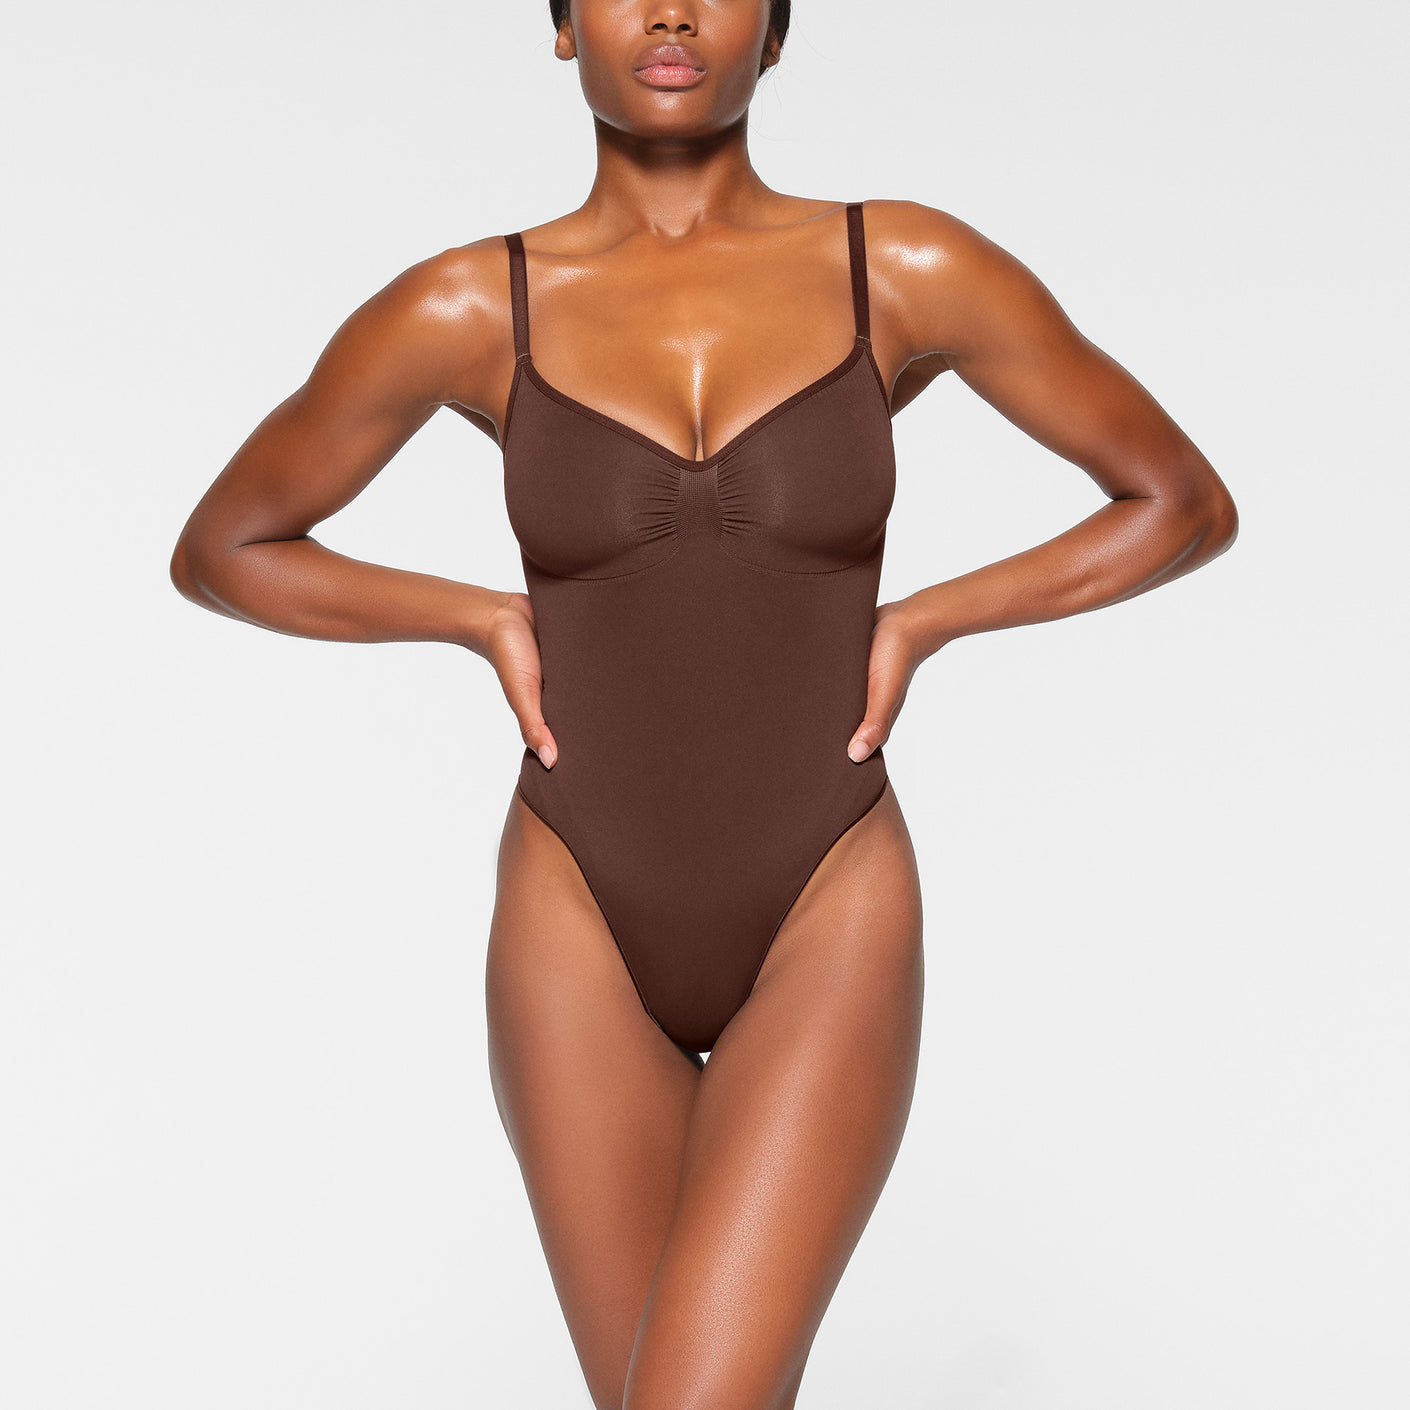 Elevate Your Bodysuit Game with Luxmery's Best Sellers Bundle - Luxmery